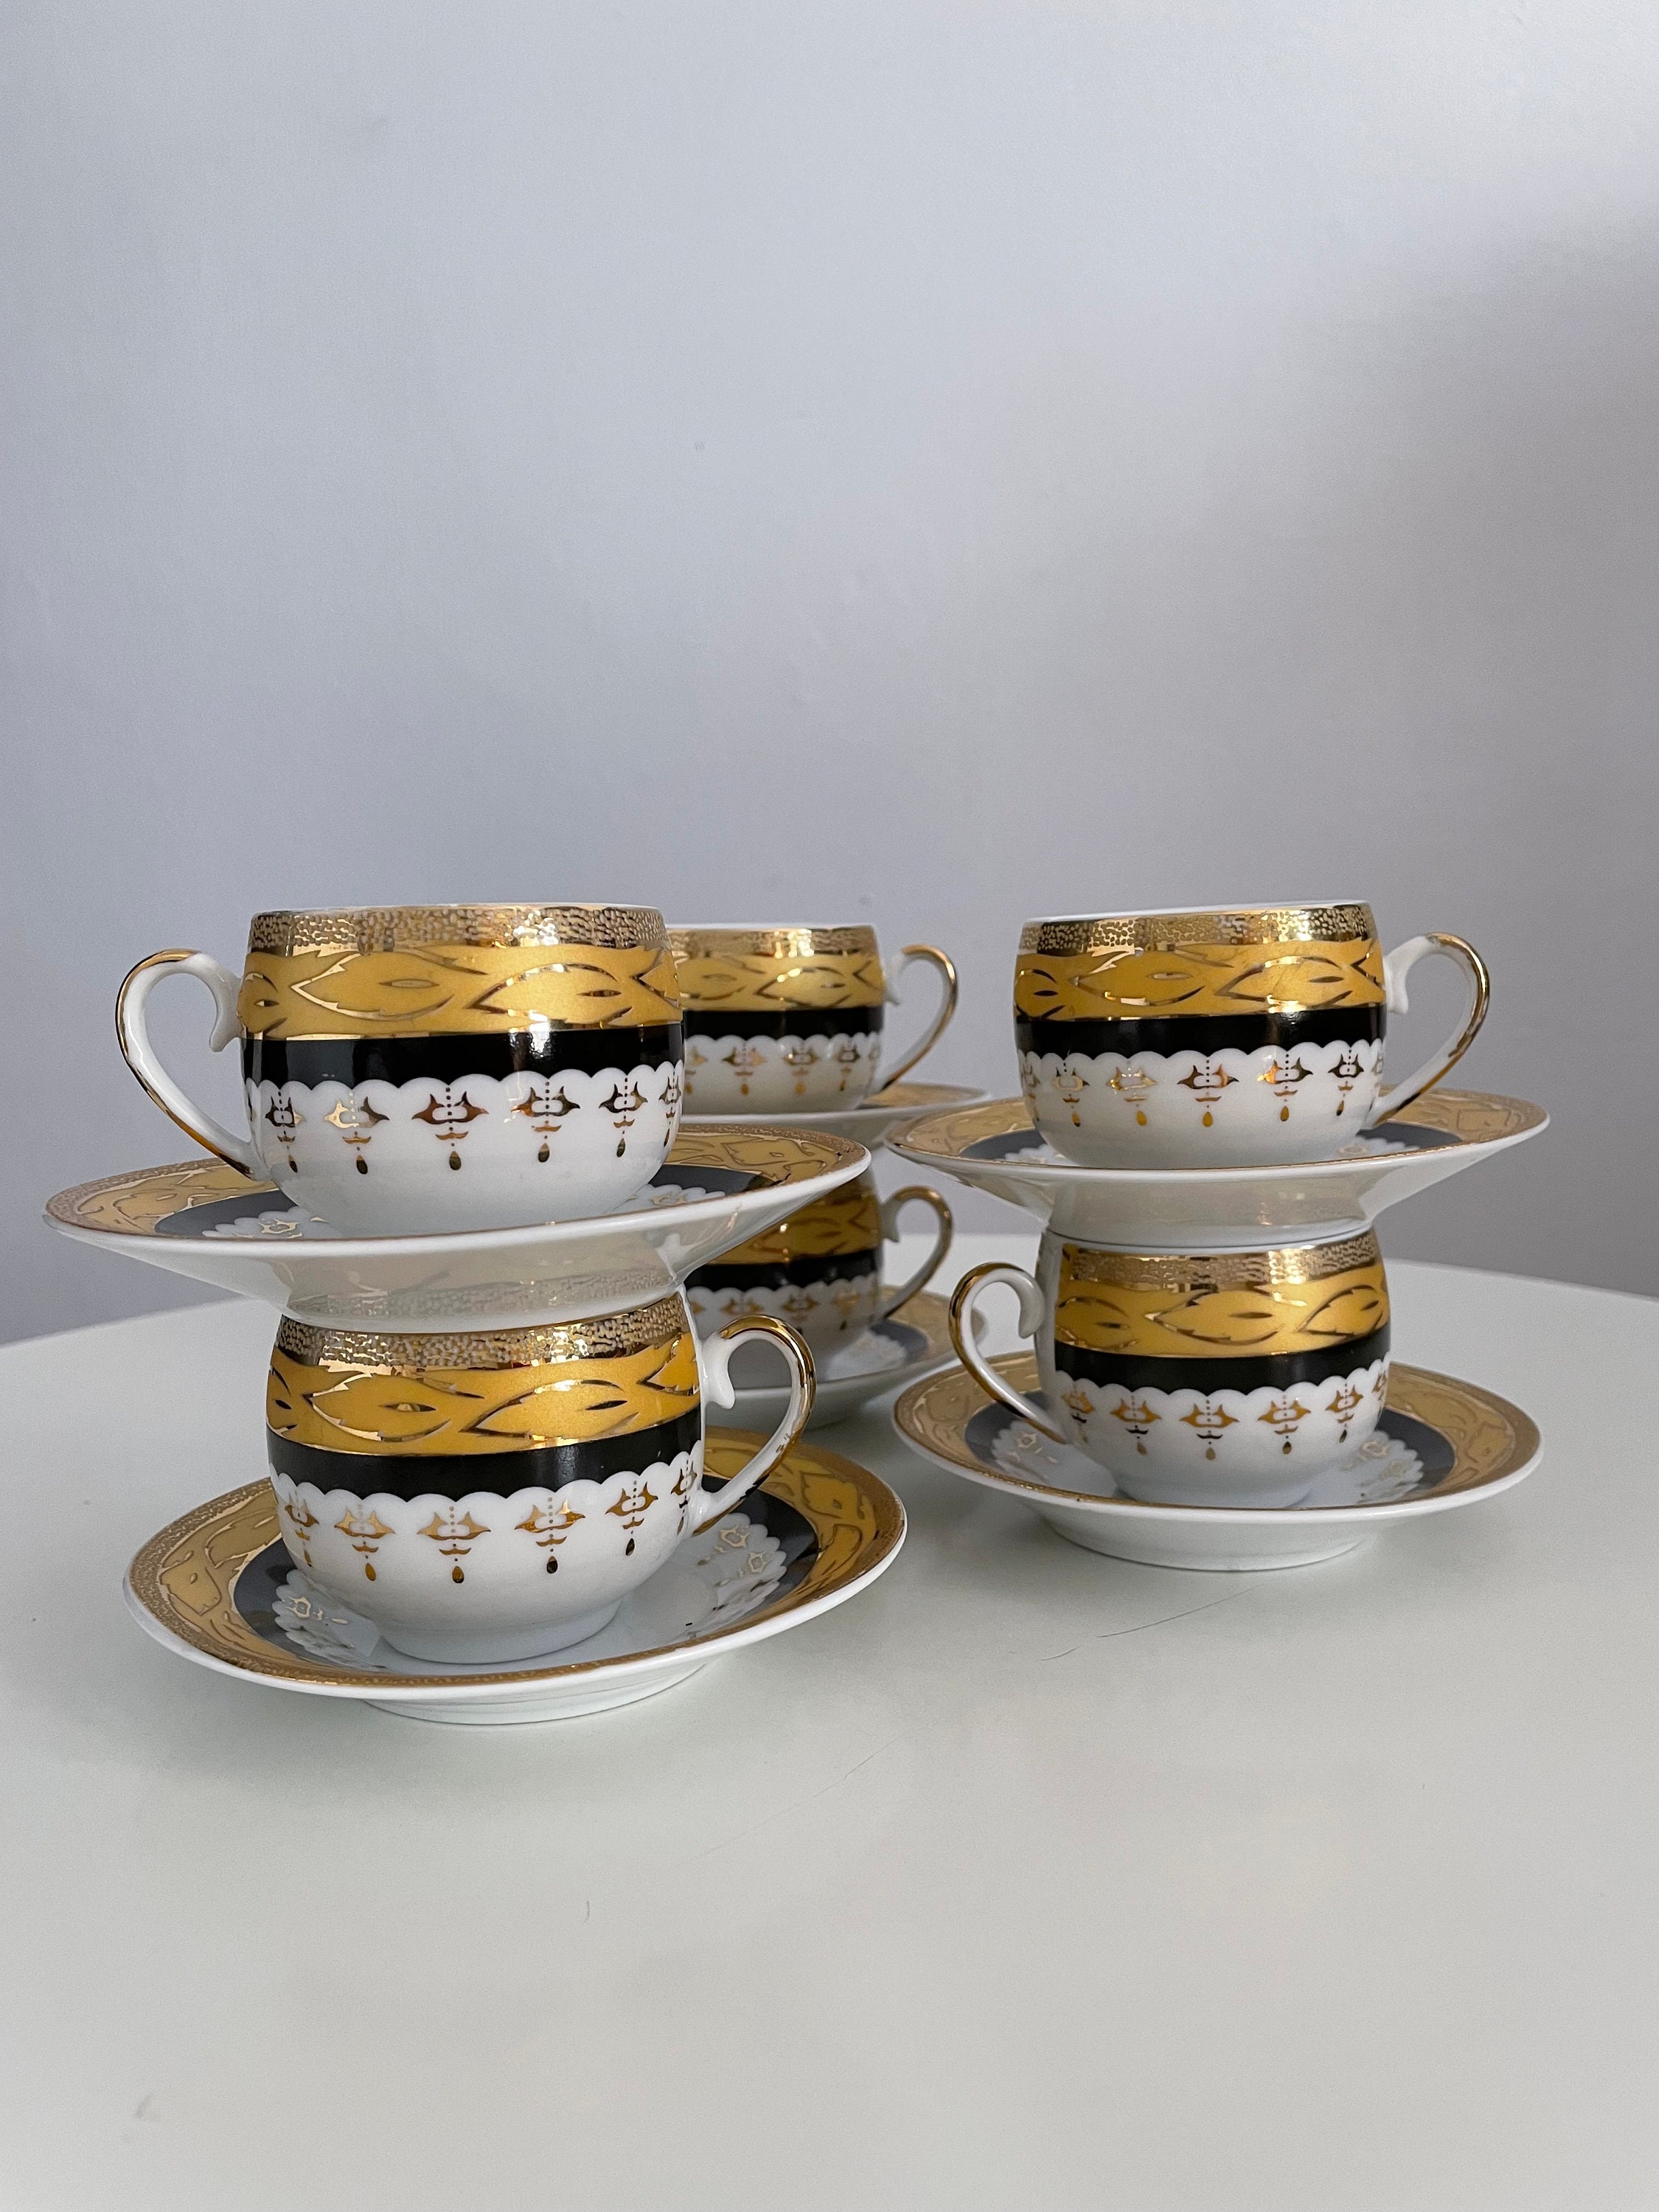 Vintage New in Box Set of 2 Demitasse Cups and Saucers by Keramik Each Cup  Reads Espresso in Gold Script 